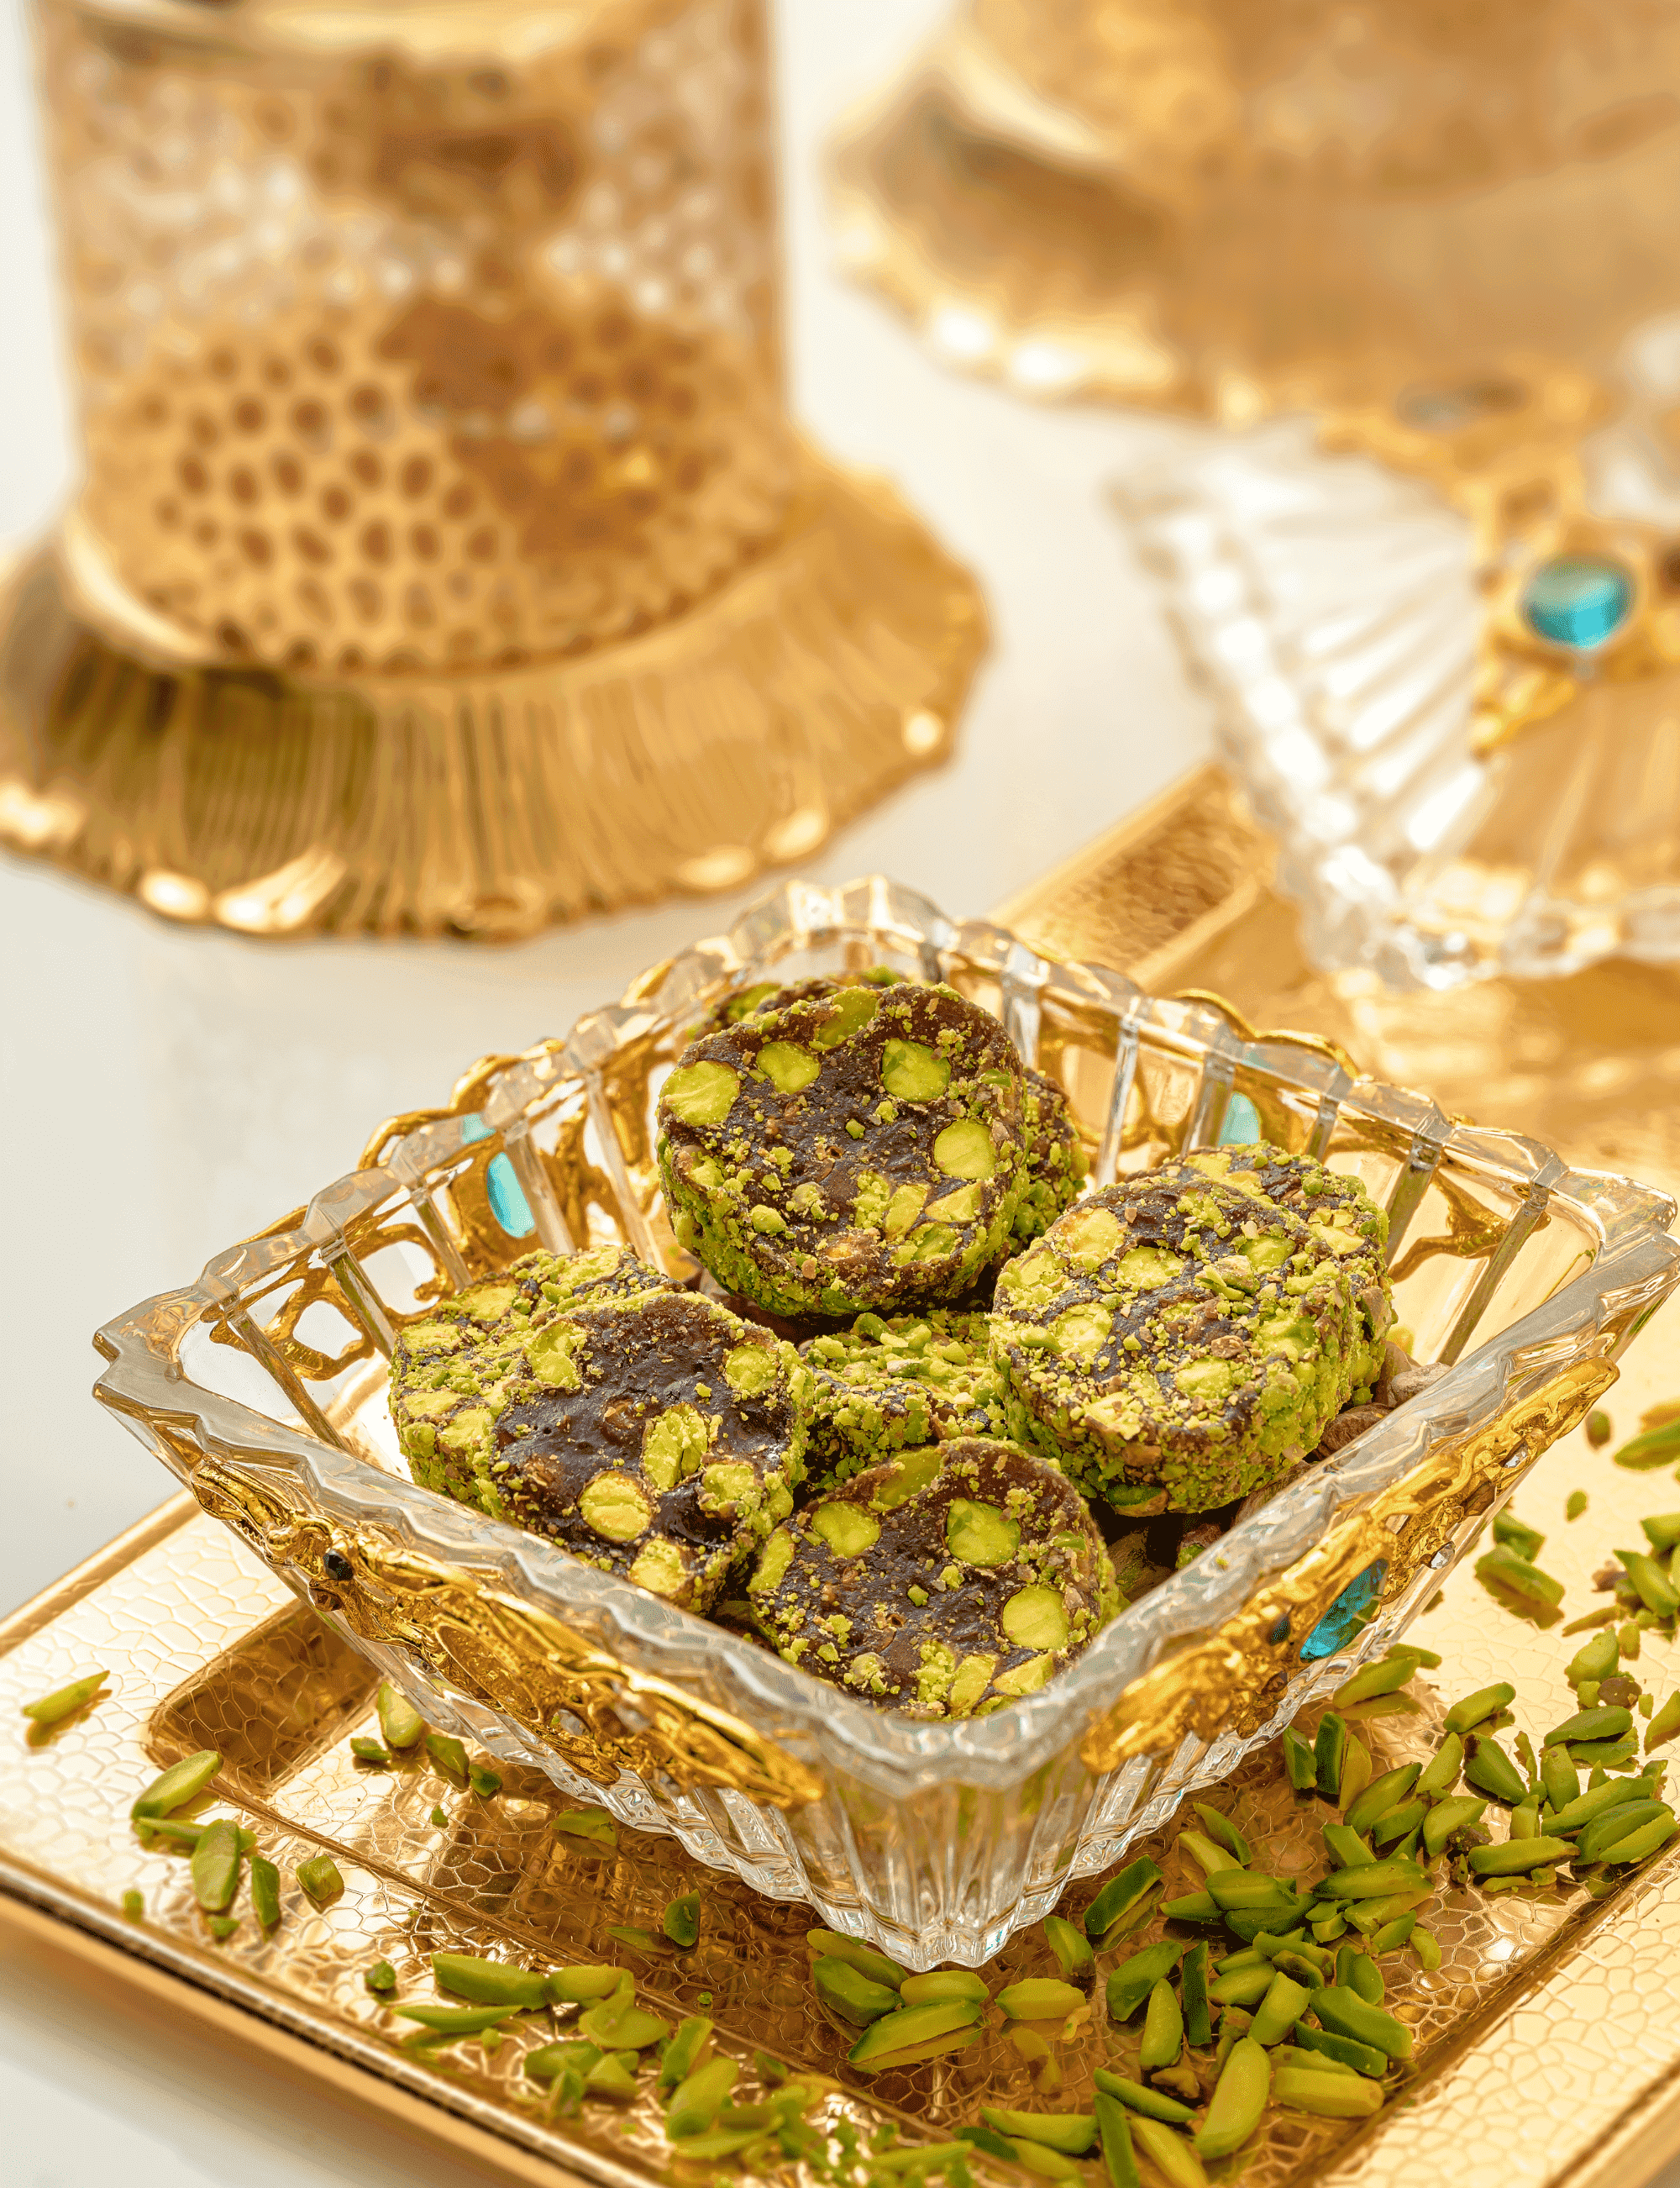 Jazaria filled with Antep pistachios